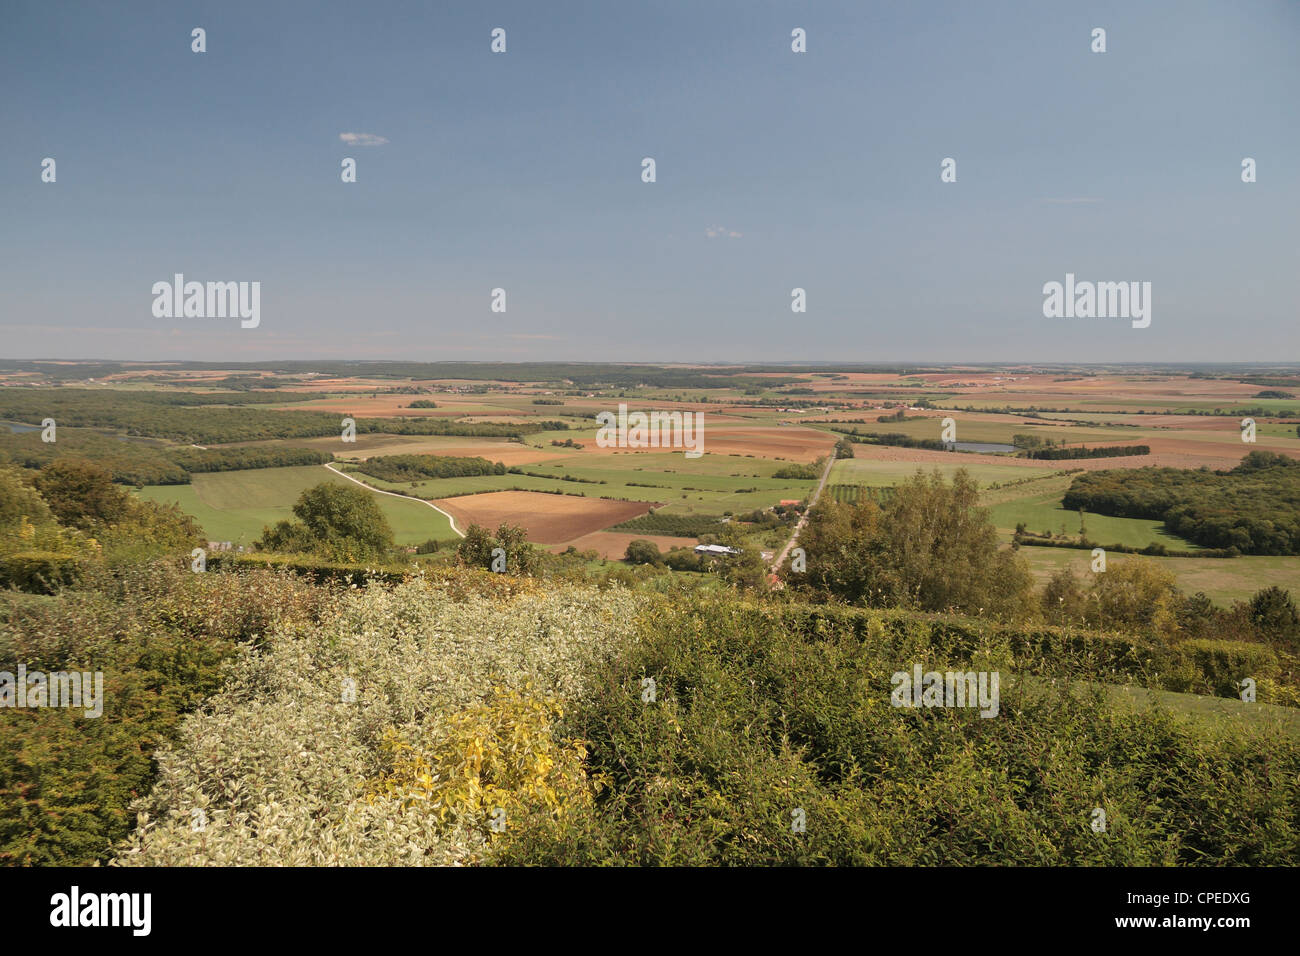 View from the Montsec American Monument Montsec (Thiaucourt), France, 10 miles east of the town of St. Mihiel. Stock Photo